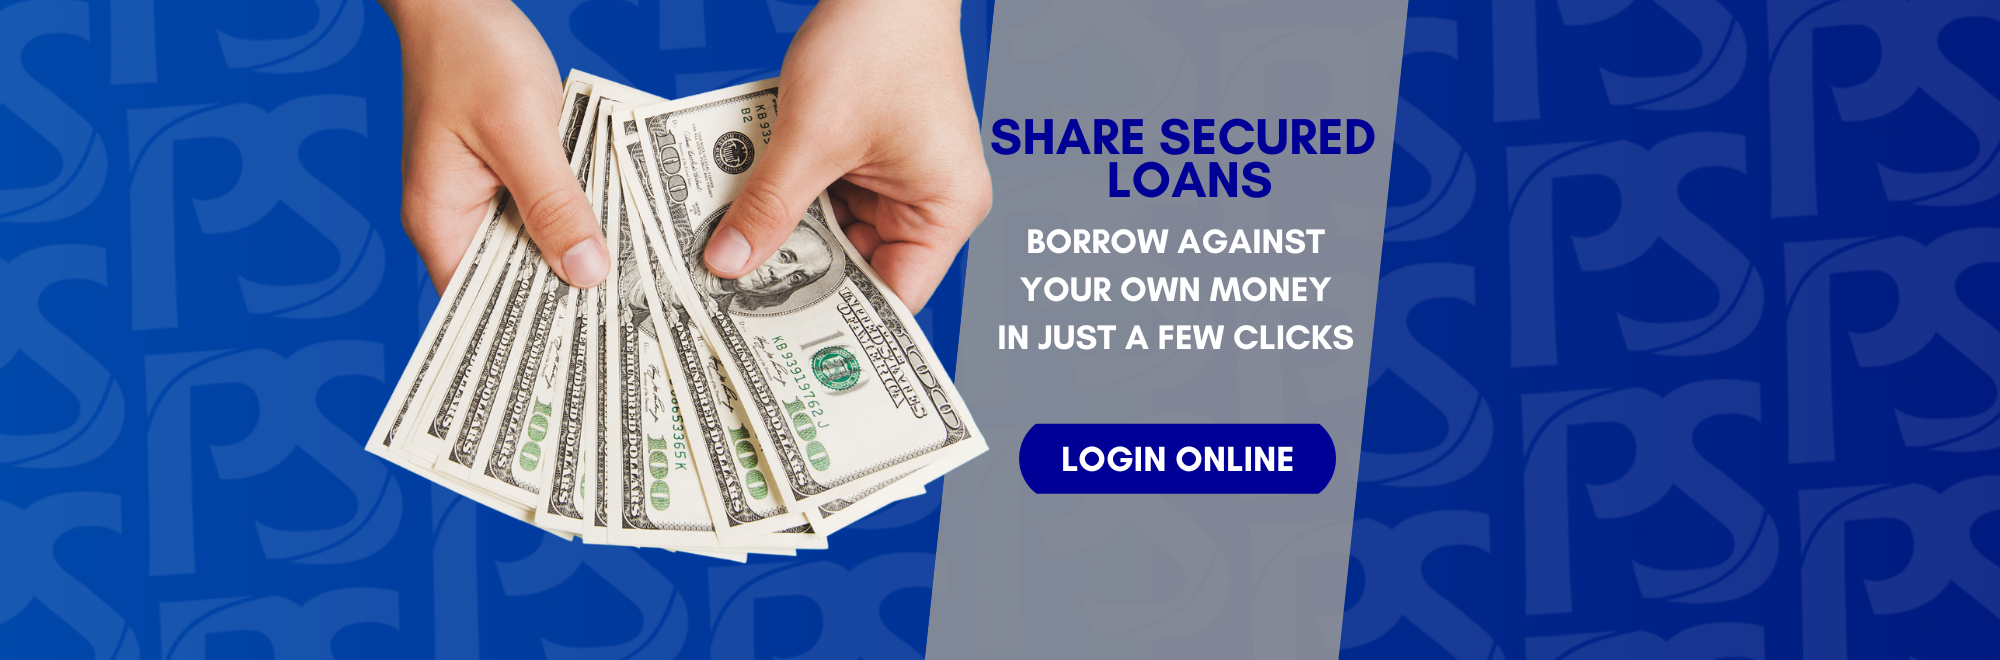 Share Secured Loans Borrow against your own money in just a few clicks.  Click to login online.